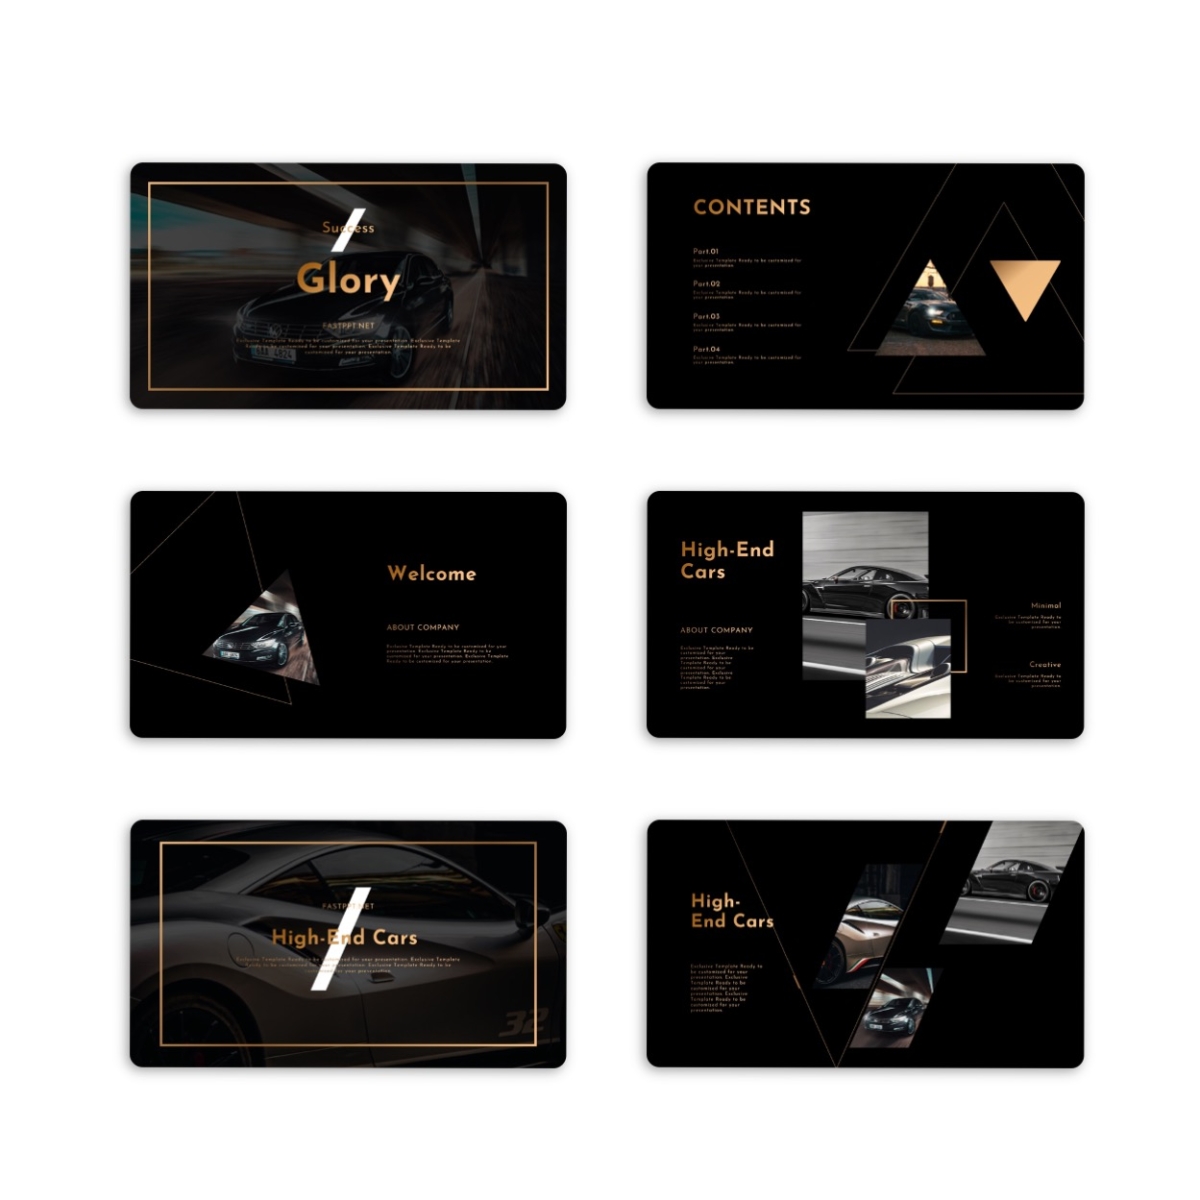 Glory Black Creative Business PowerPoint Template